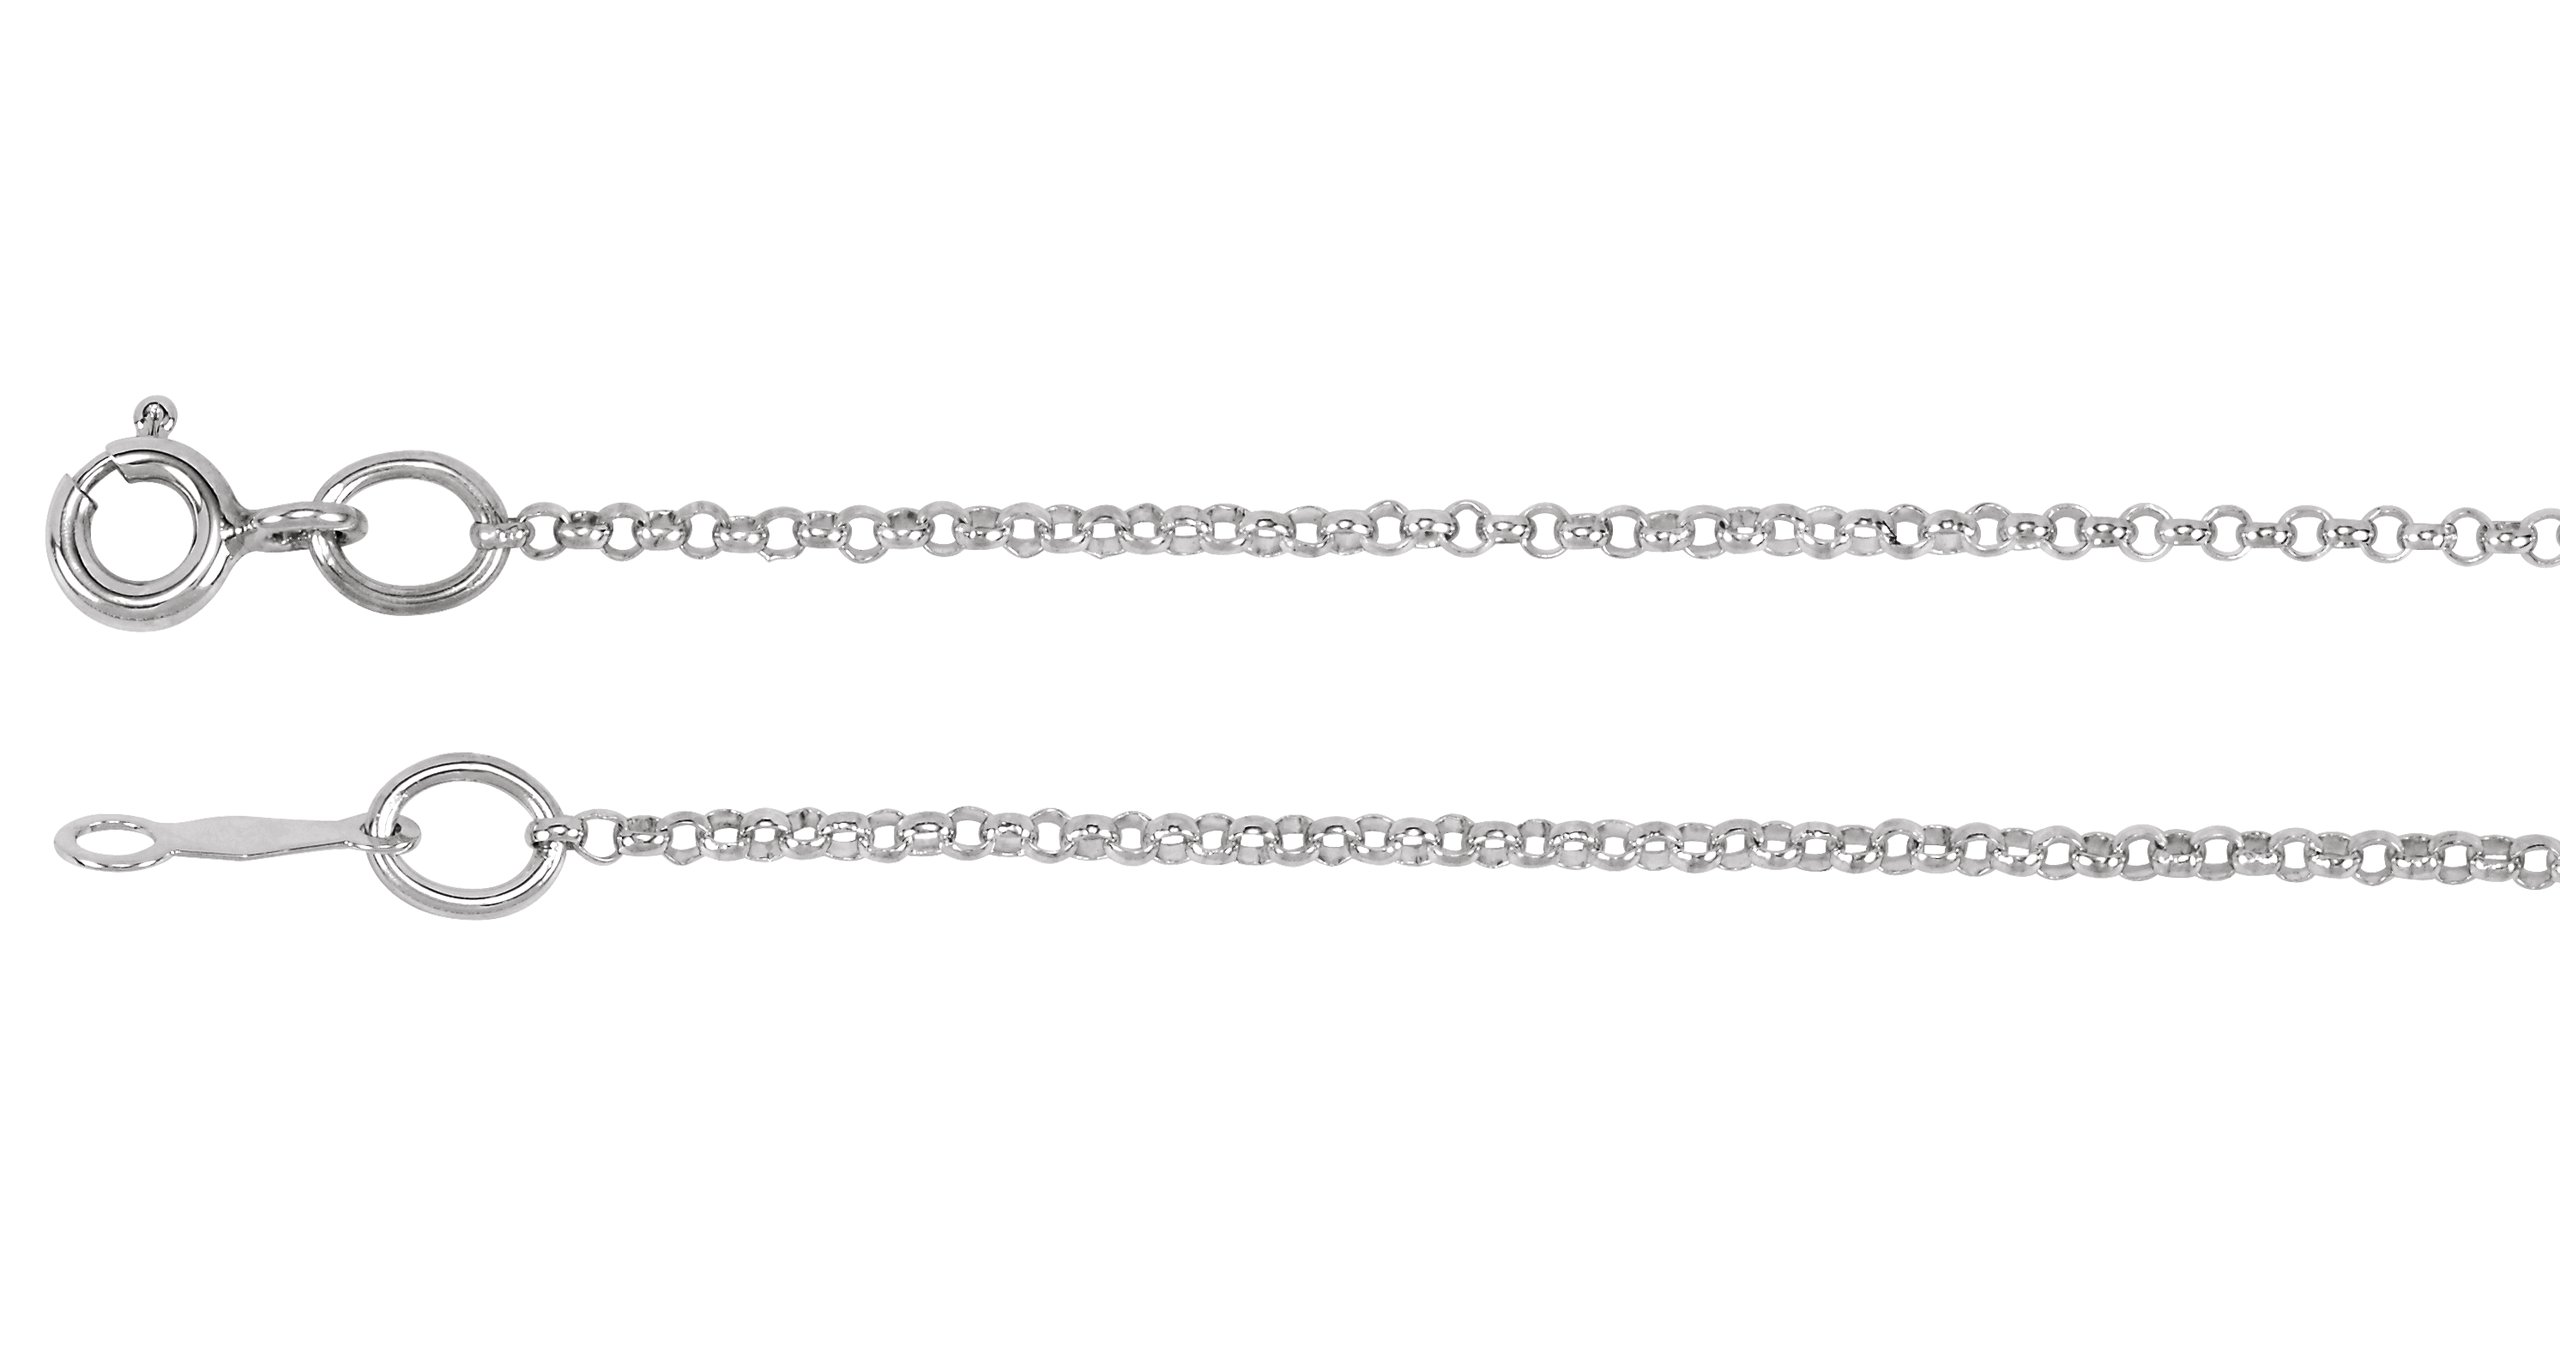 1.25mm Sterling Silver Rolo Chain with Spring Ring Clasp 20 inch Ref 212000